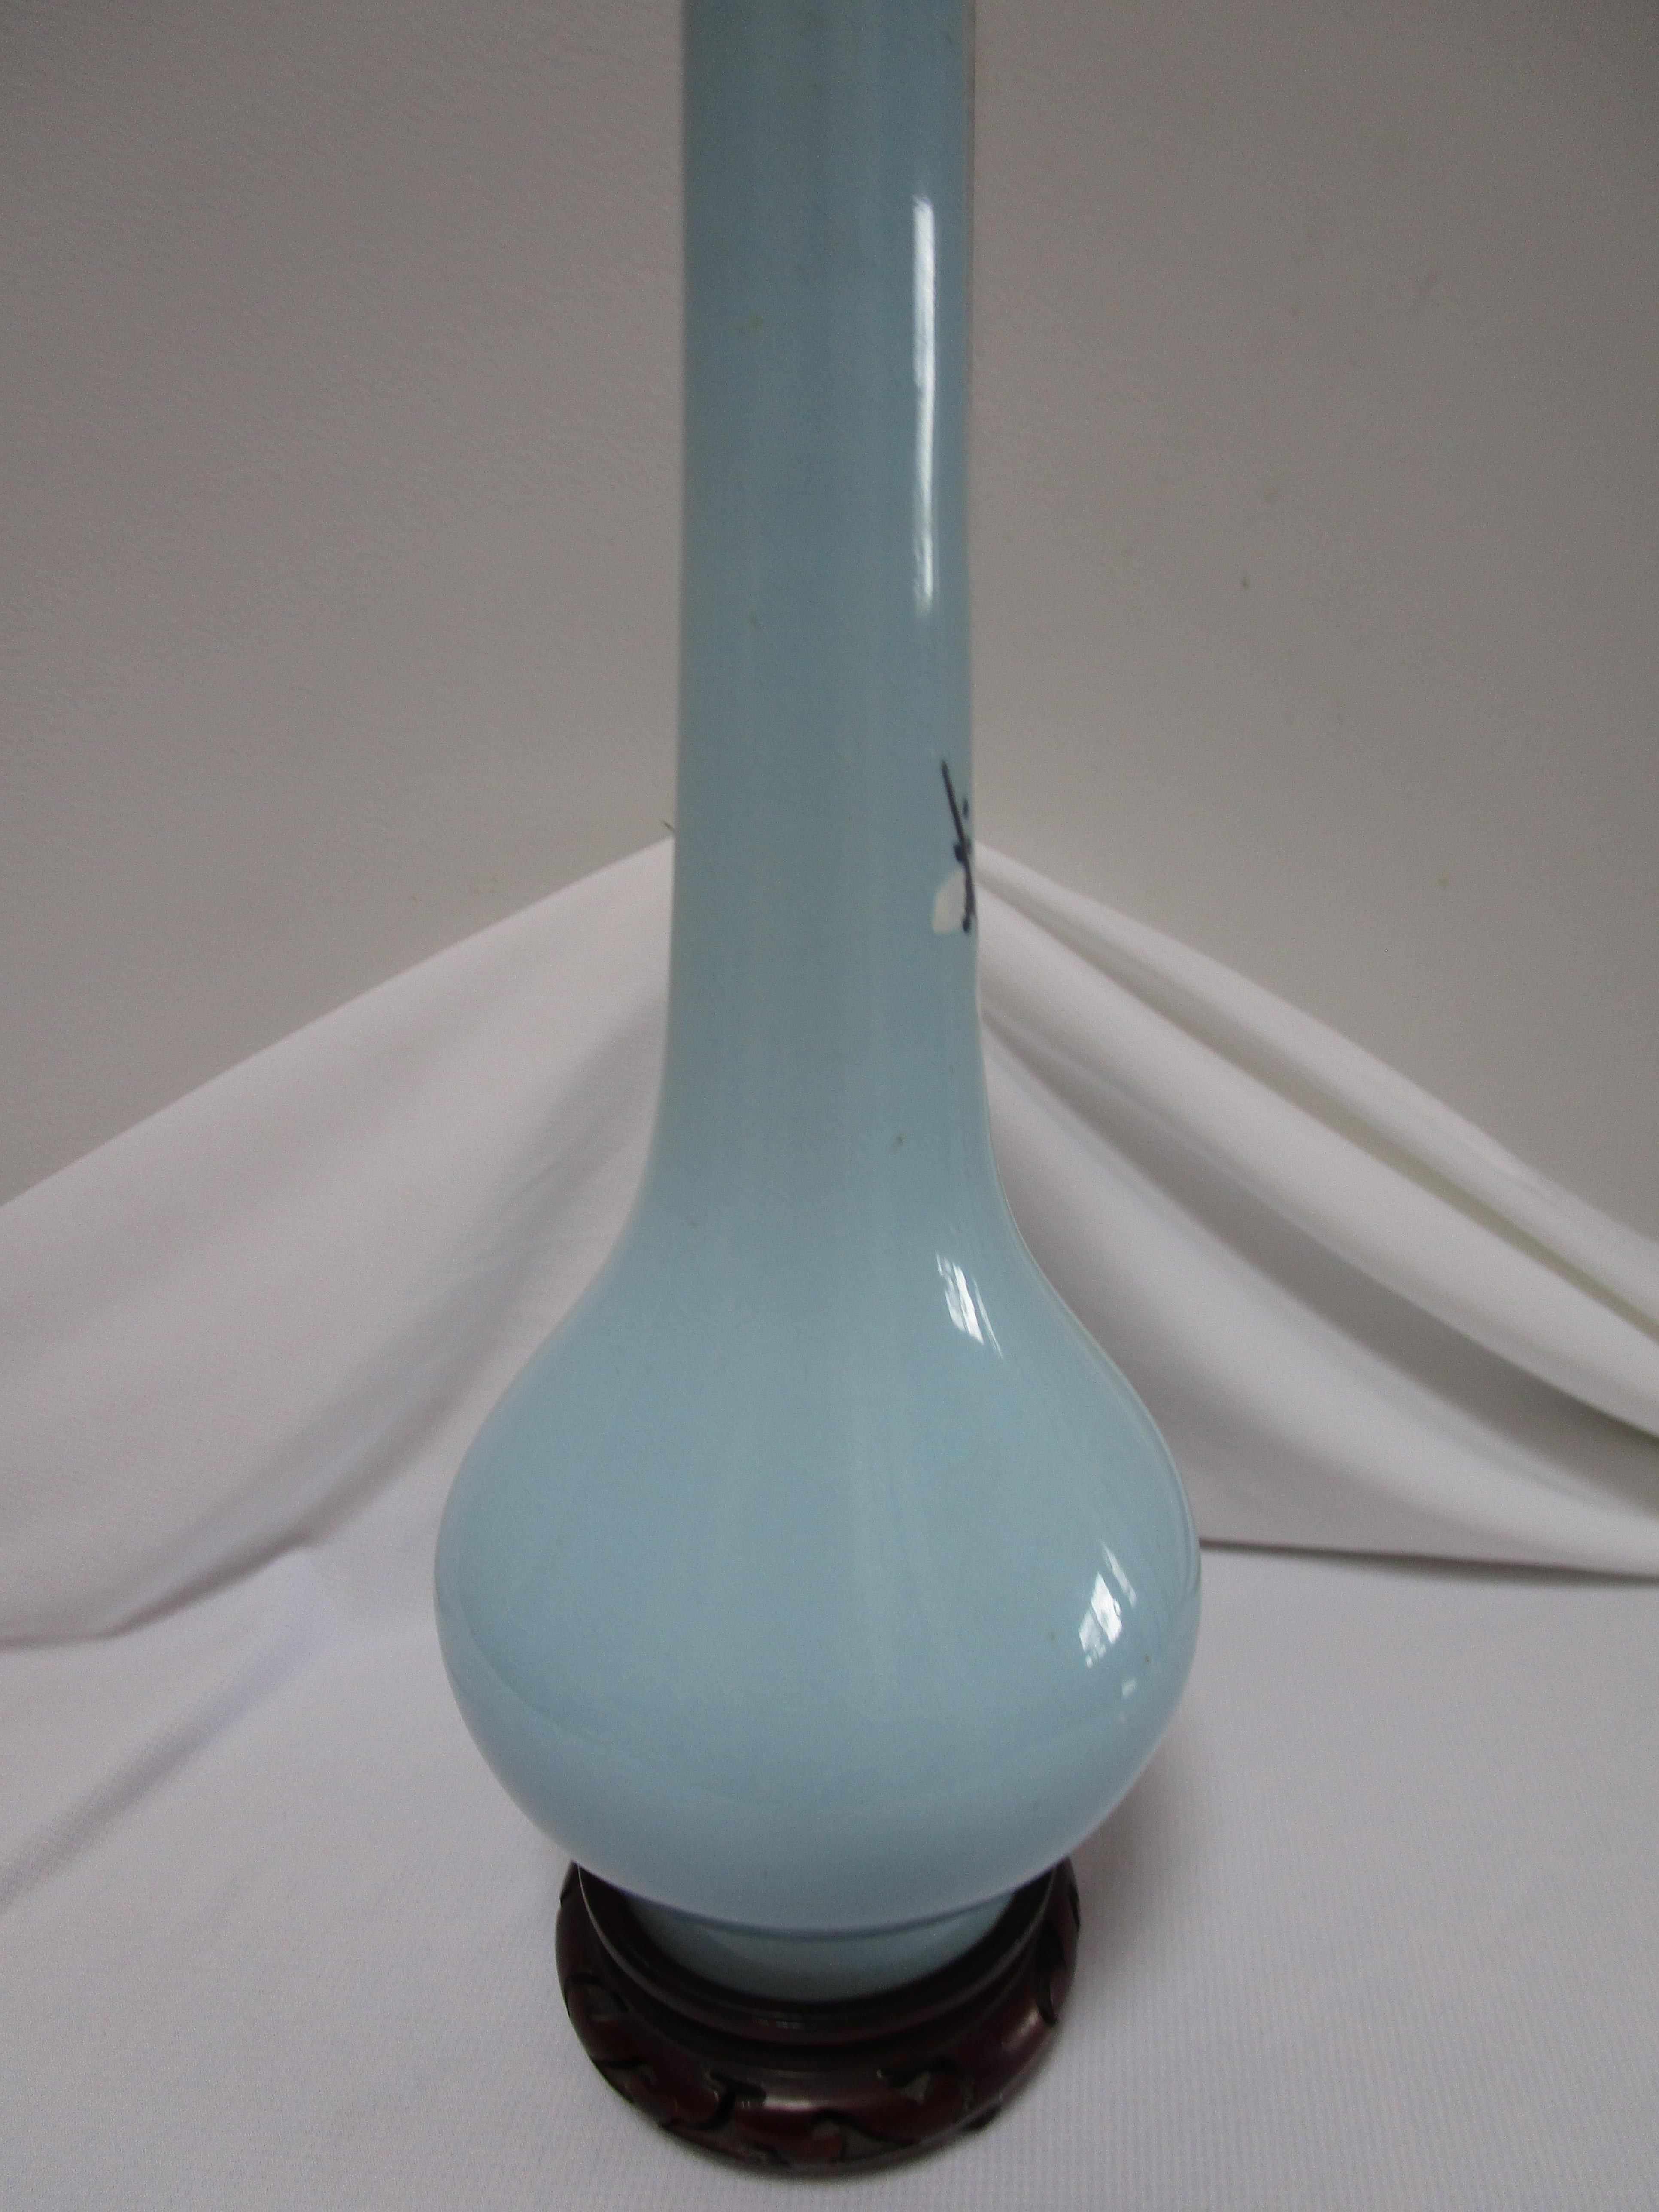 Hand-Painted Turquoise Vintage Japanese Ceramic Bulbous Vase on Rosewood Stand For Sale